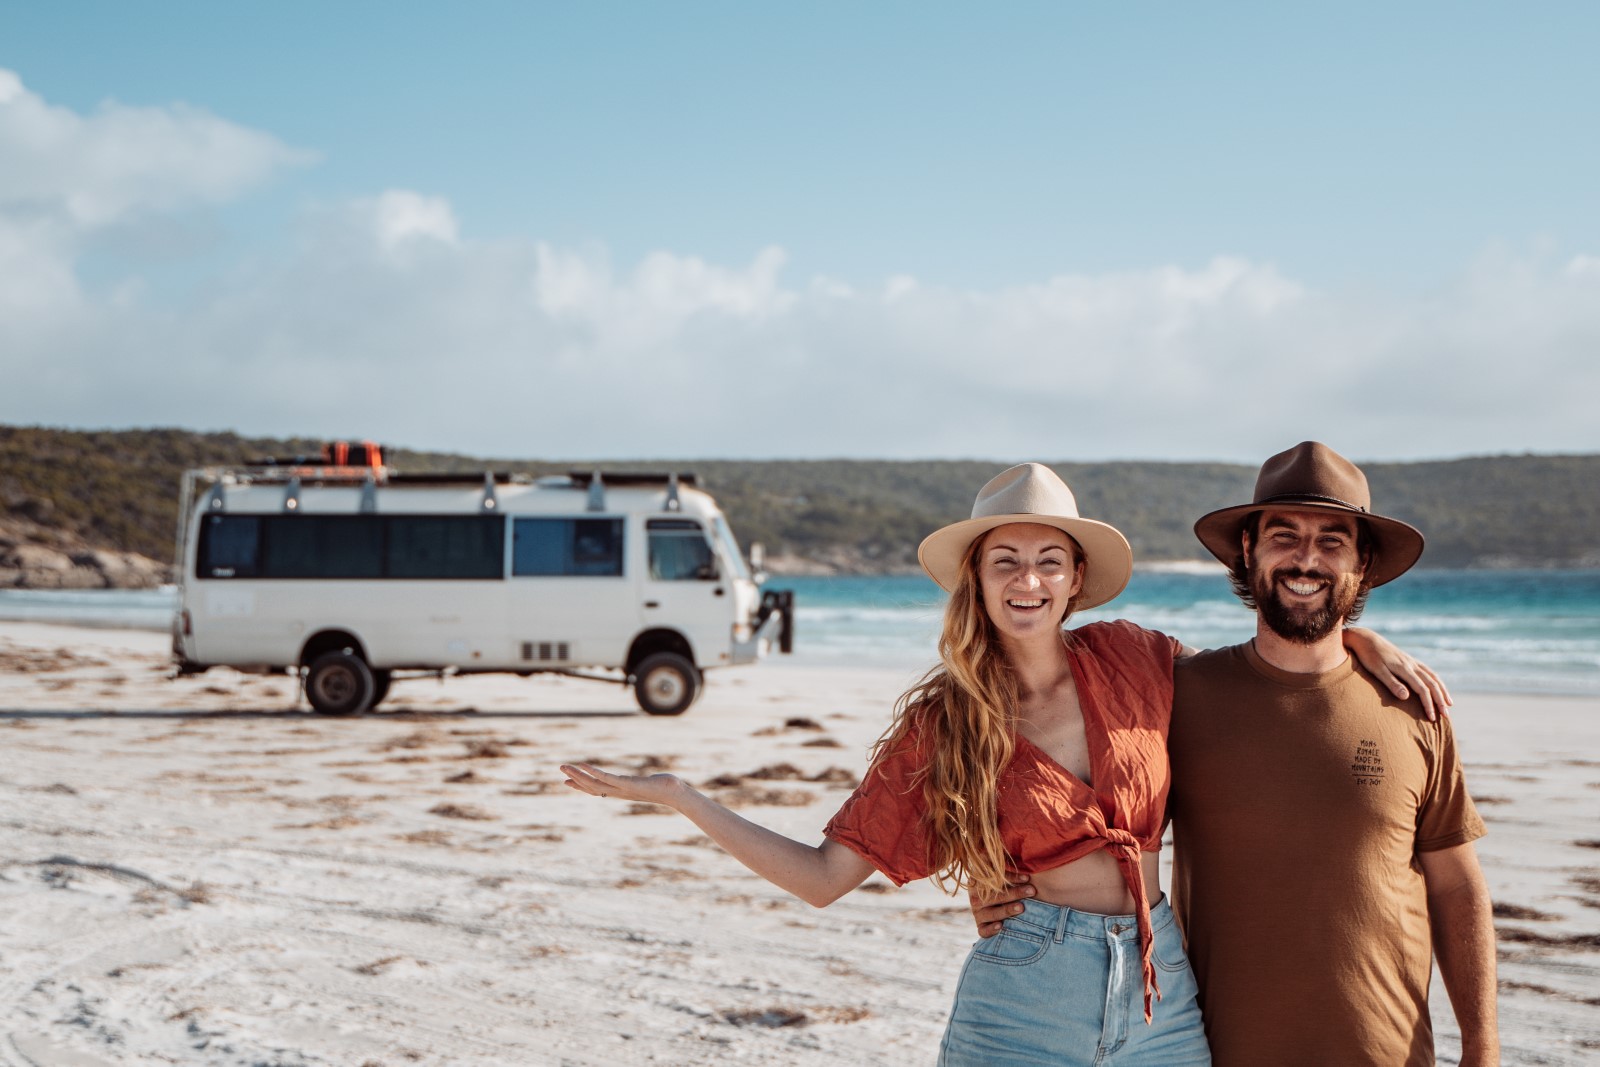 Chris and Beck of Salt and Charcoal stands on a sandy beach in Western Australia with Beck extending her arm showing the Salt and Charcoal camper van behind them.